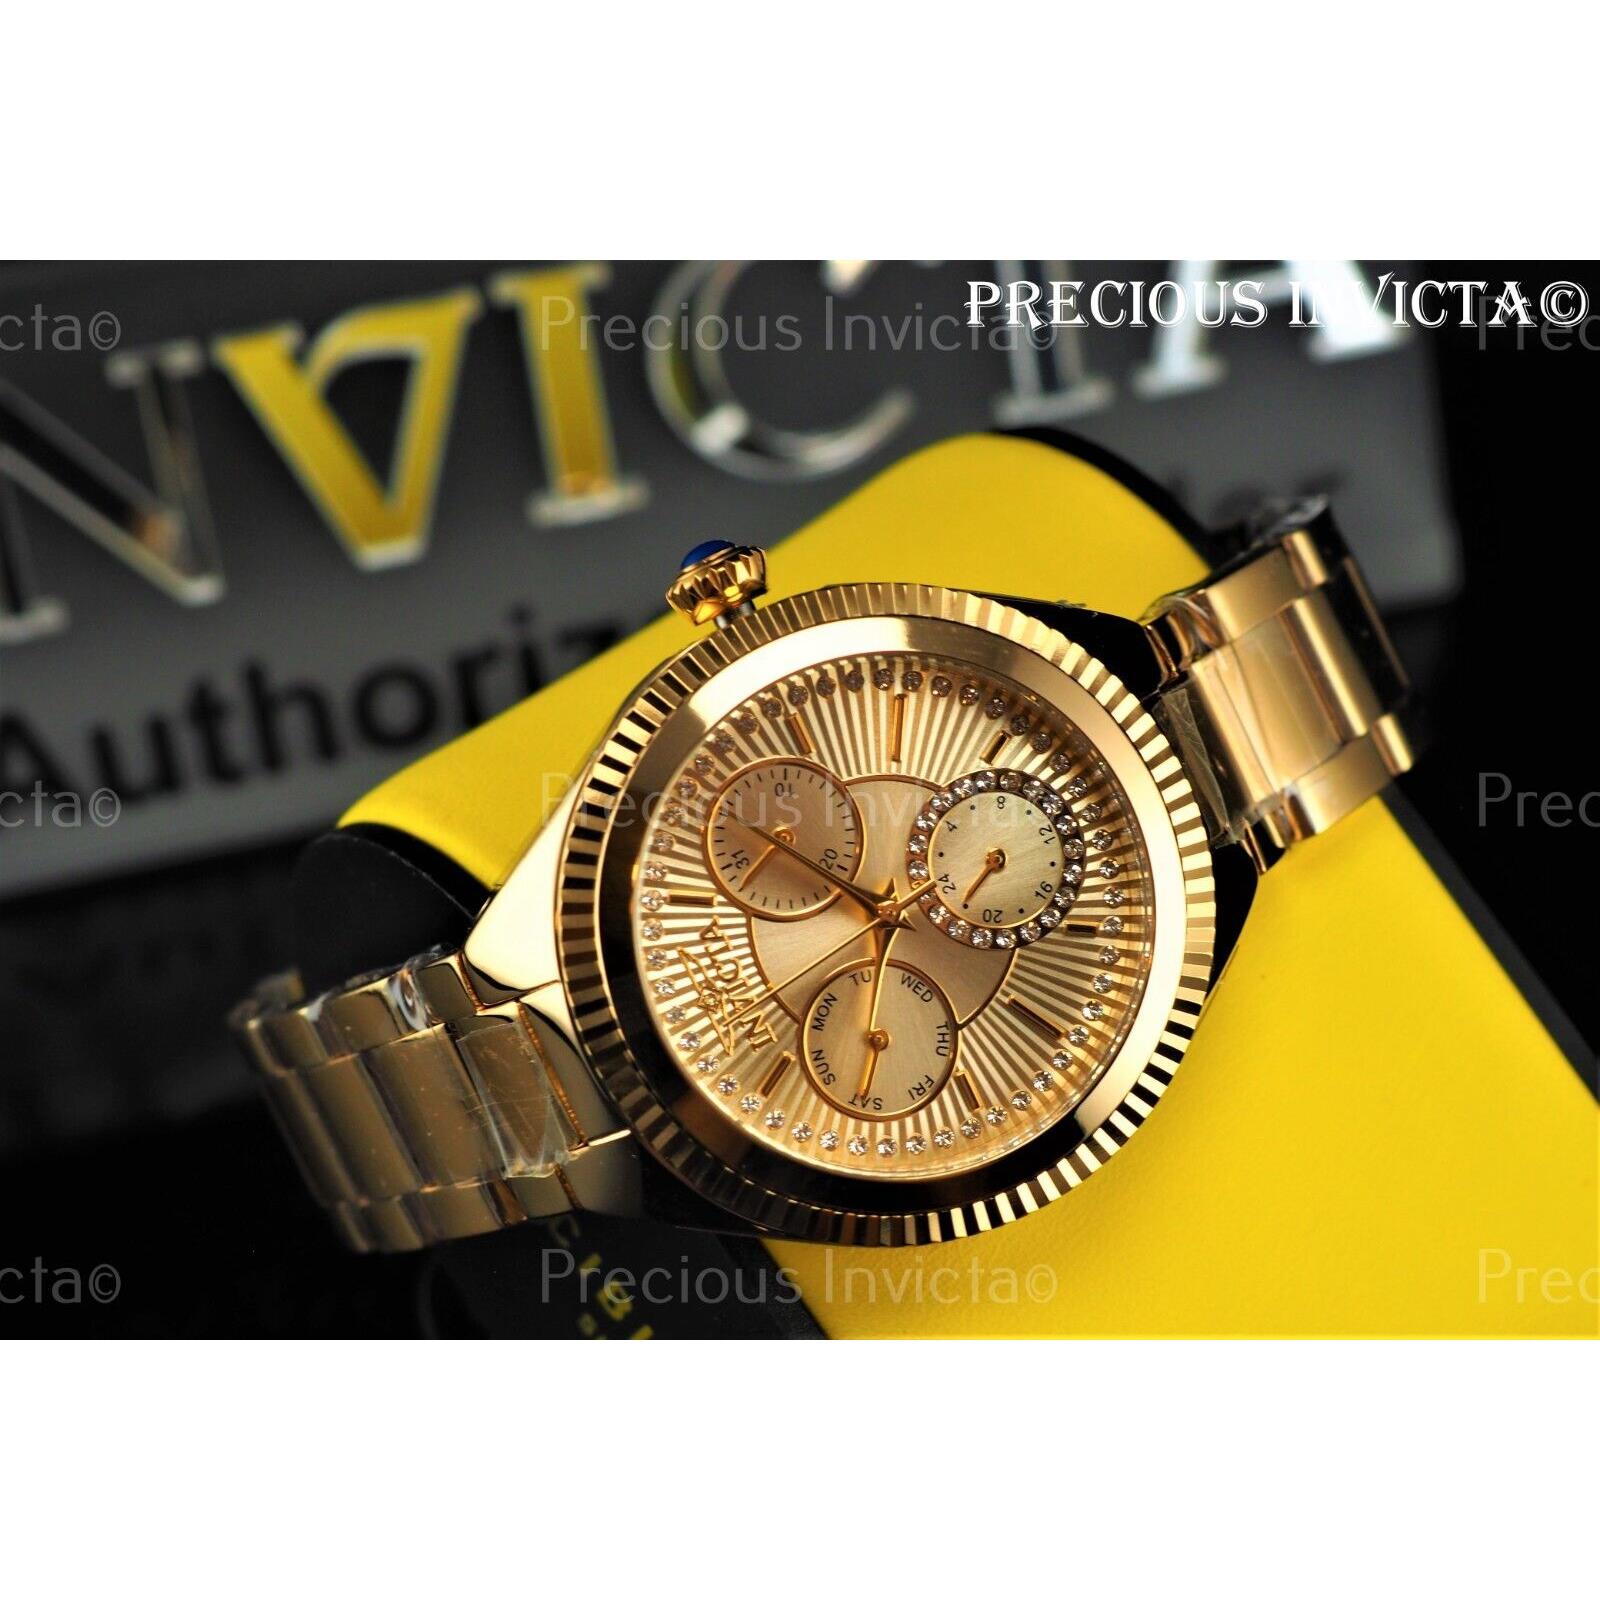 Invicta watch  - White Dial, Gold Tone Band, White and Gold Other Dial